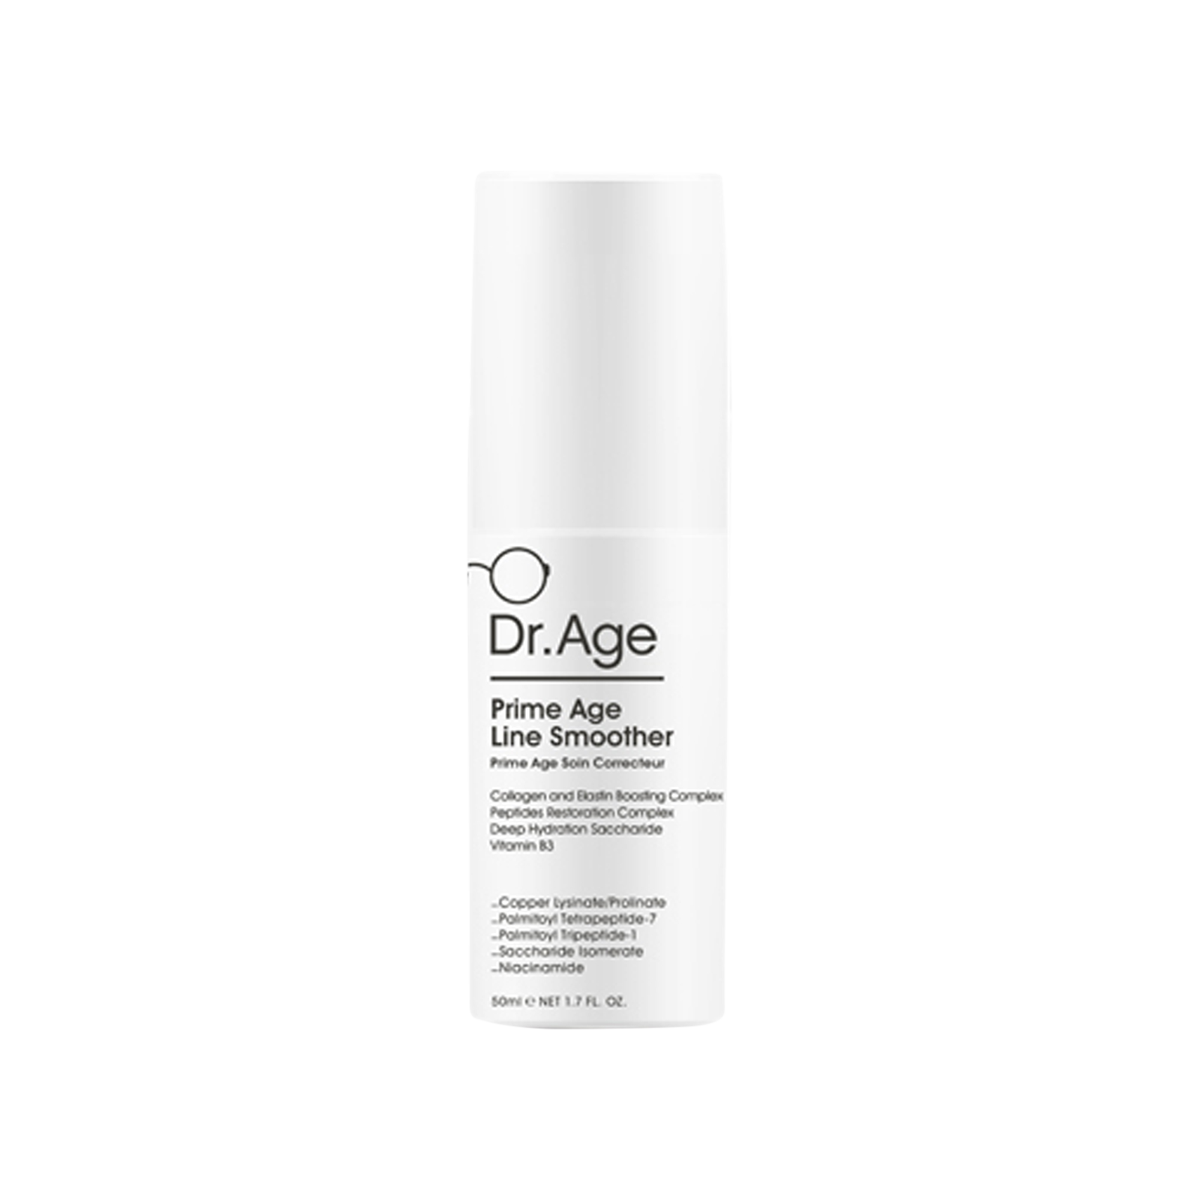 Dr. Age - Prime Age Line Smoother